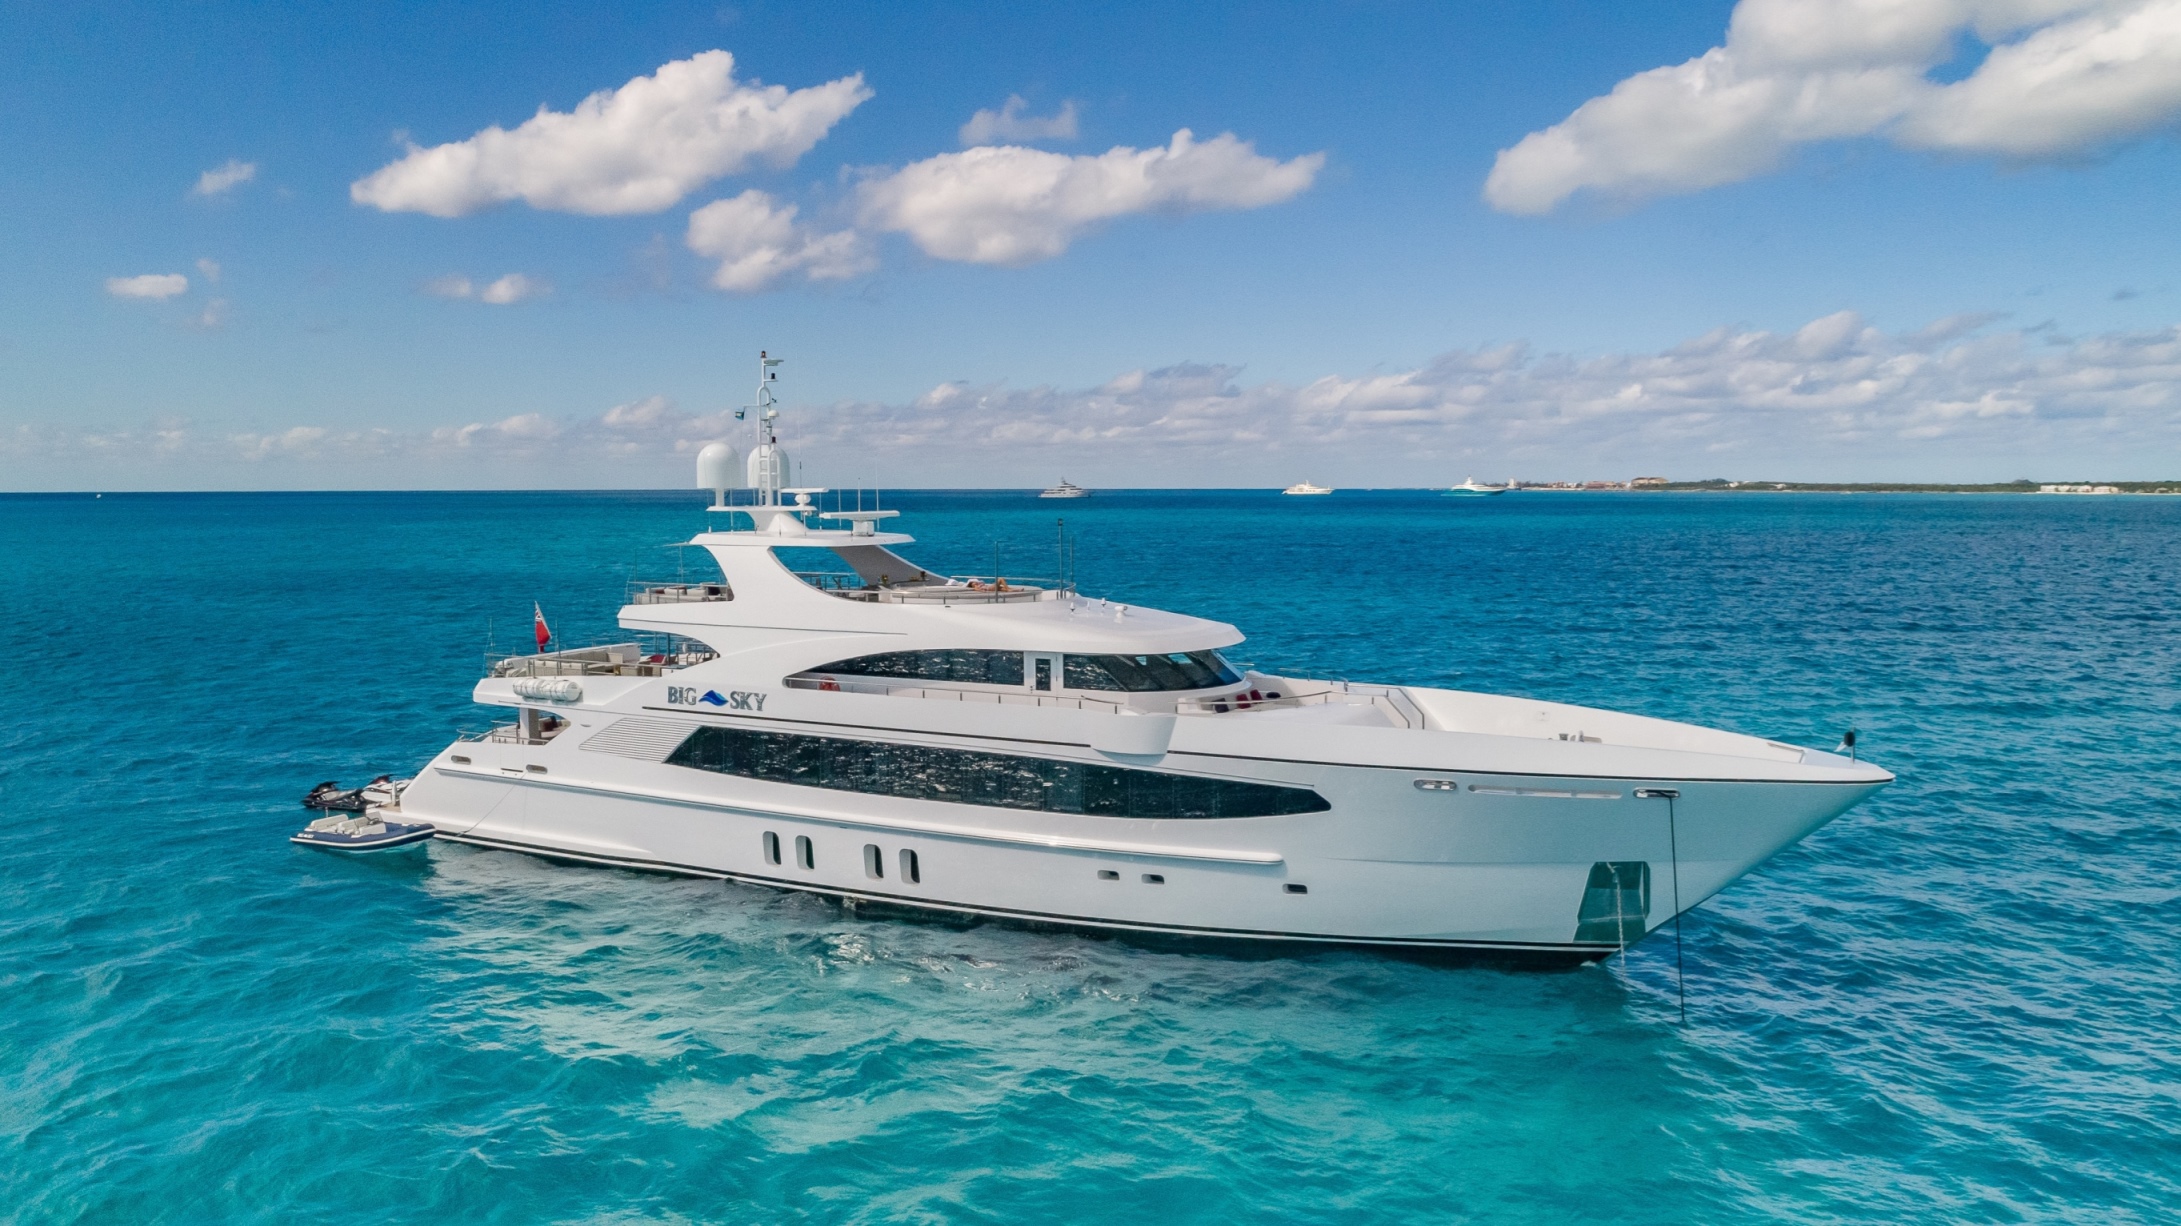 Luxury charter yacht BIG SKY available in the Bahamas in 2022